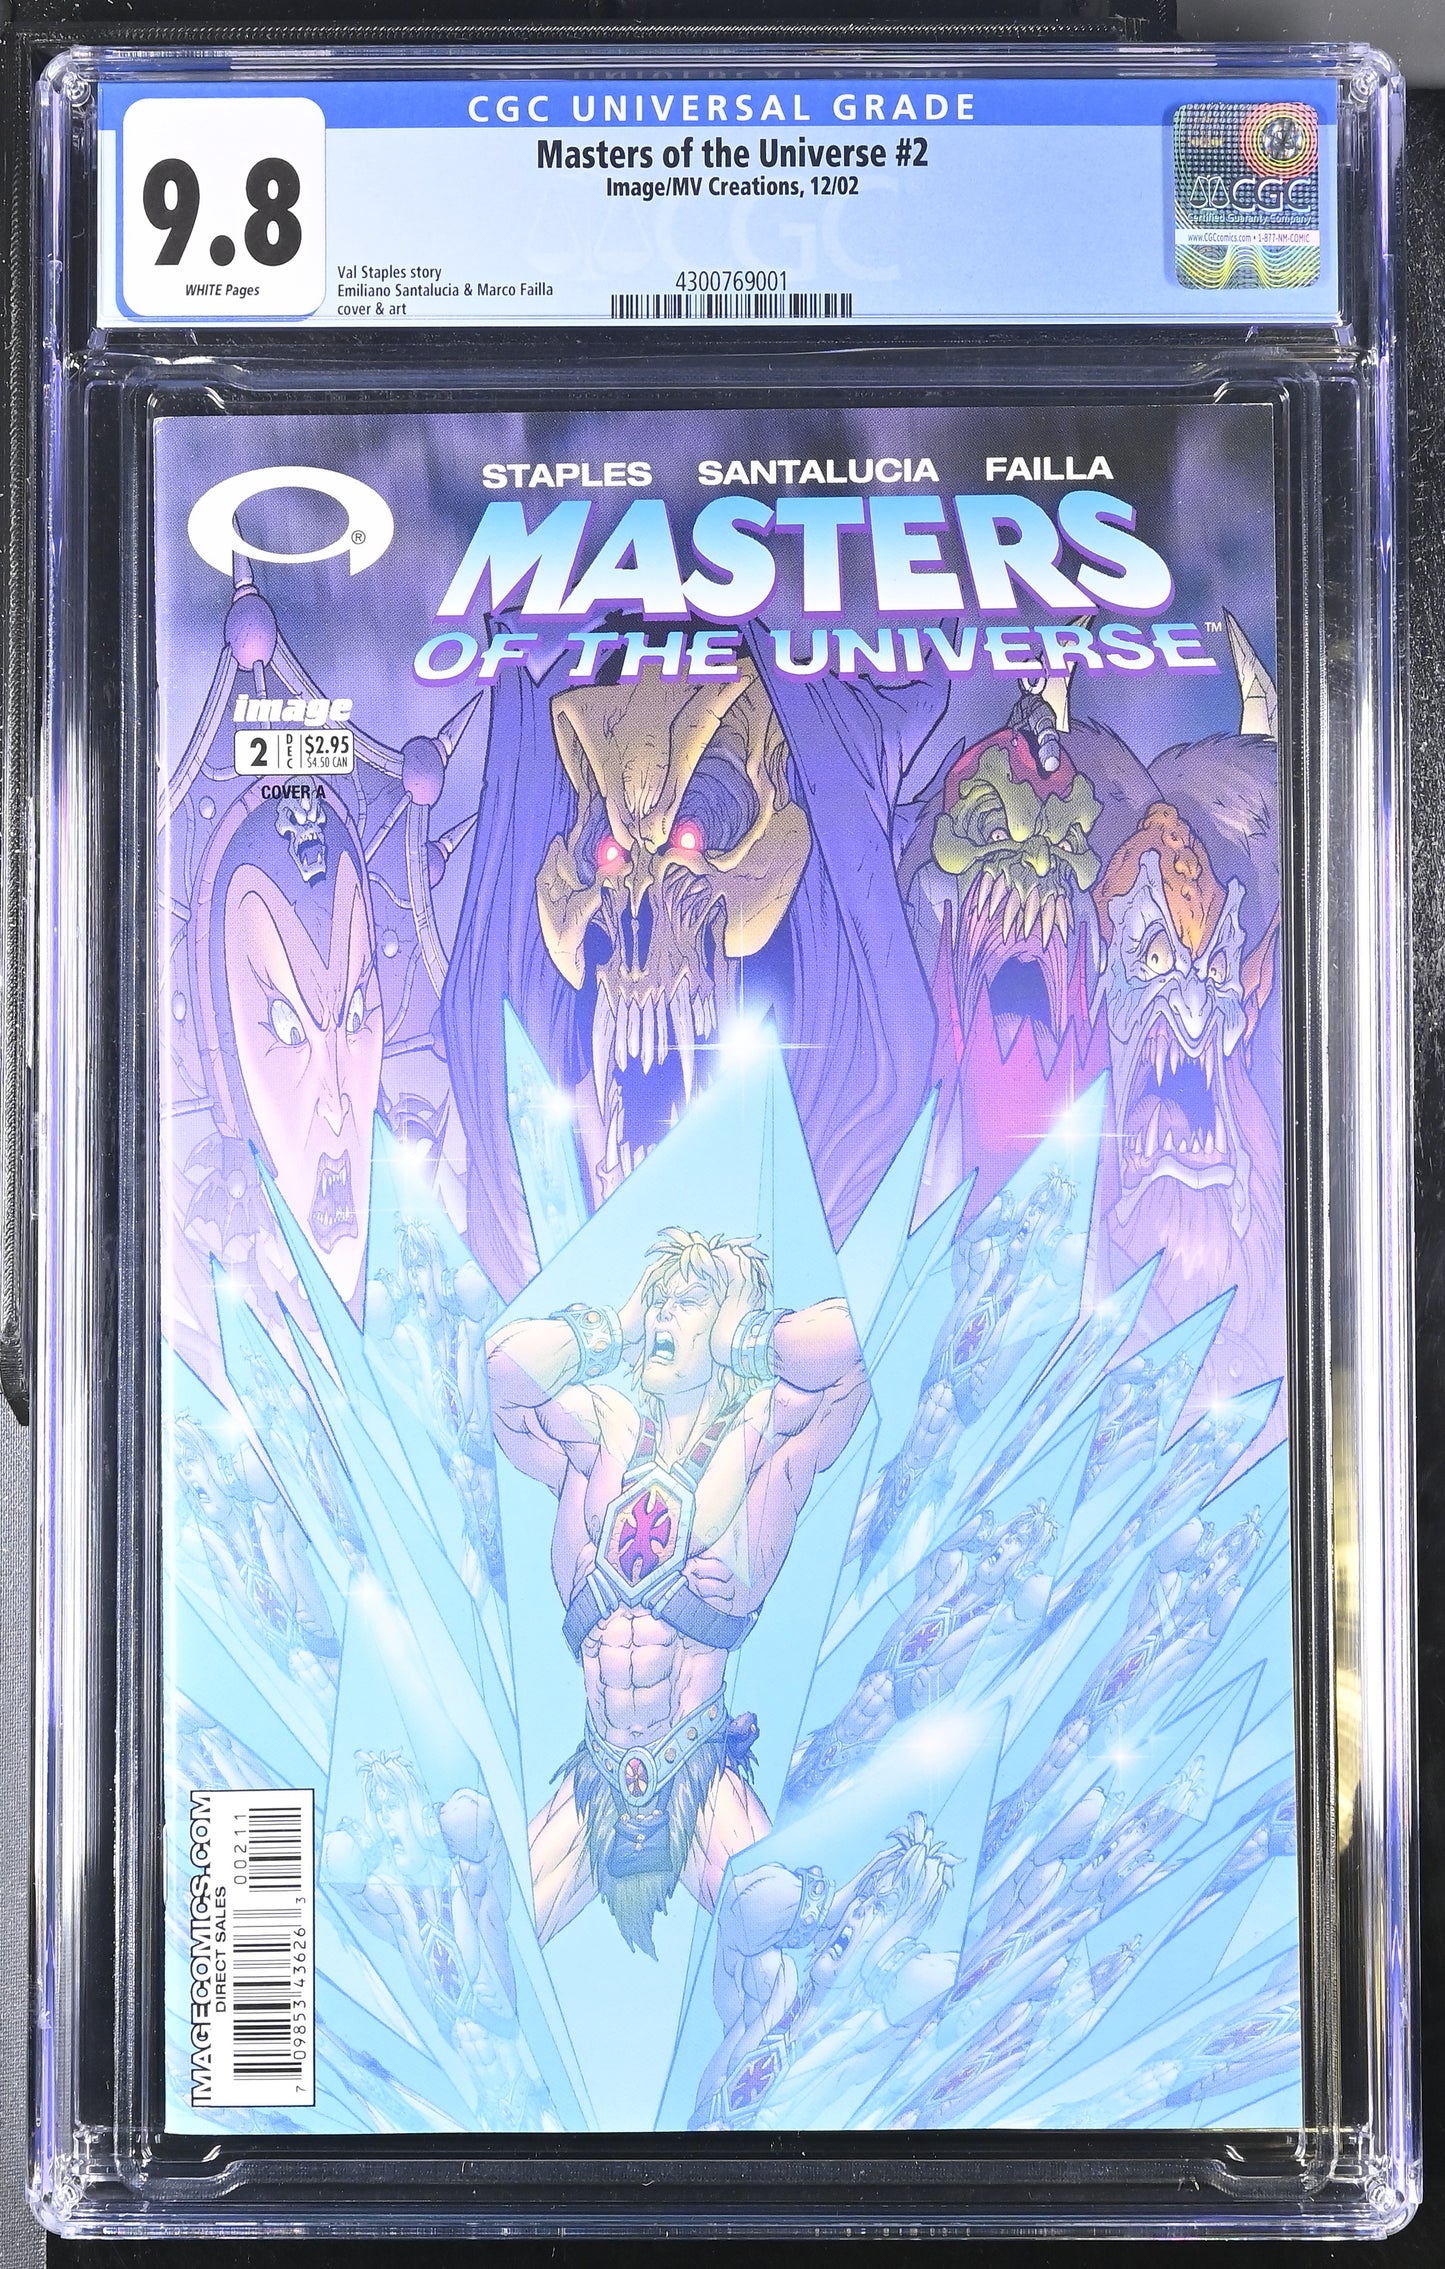 2002 Masters of the Universe #2 Cover A Image/MV Creations CGC 9.2 POP 5